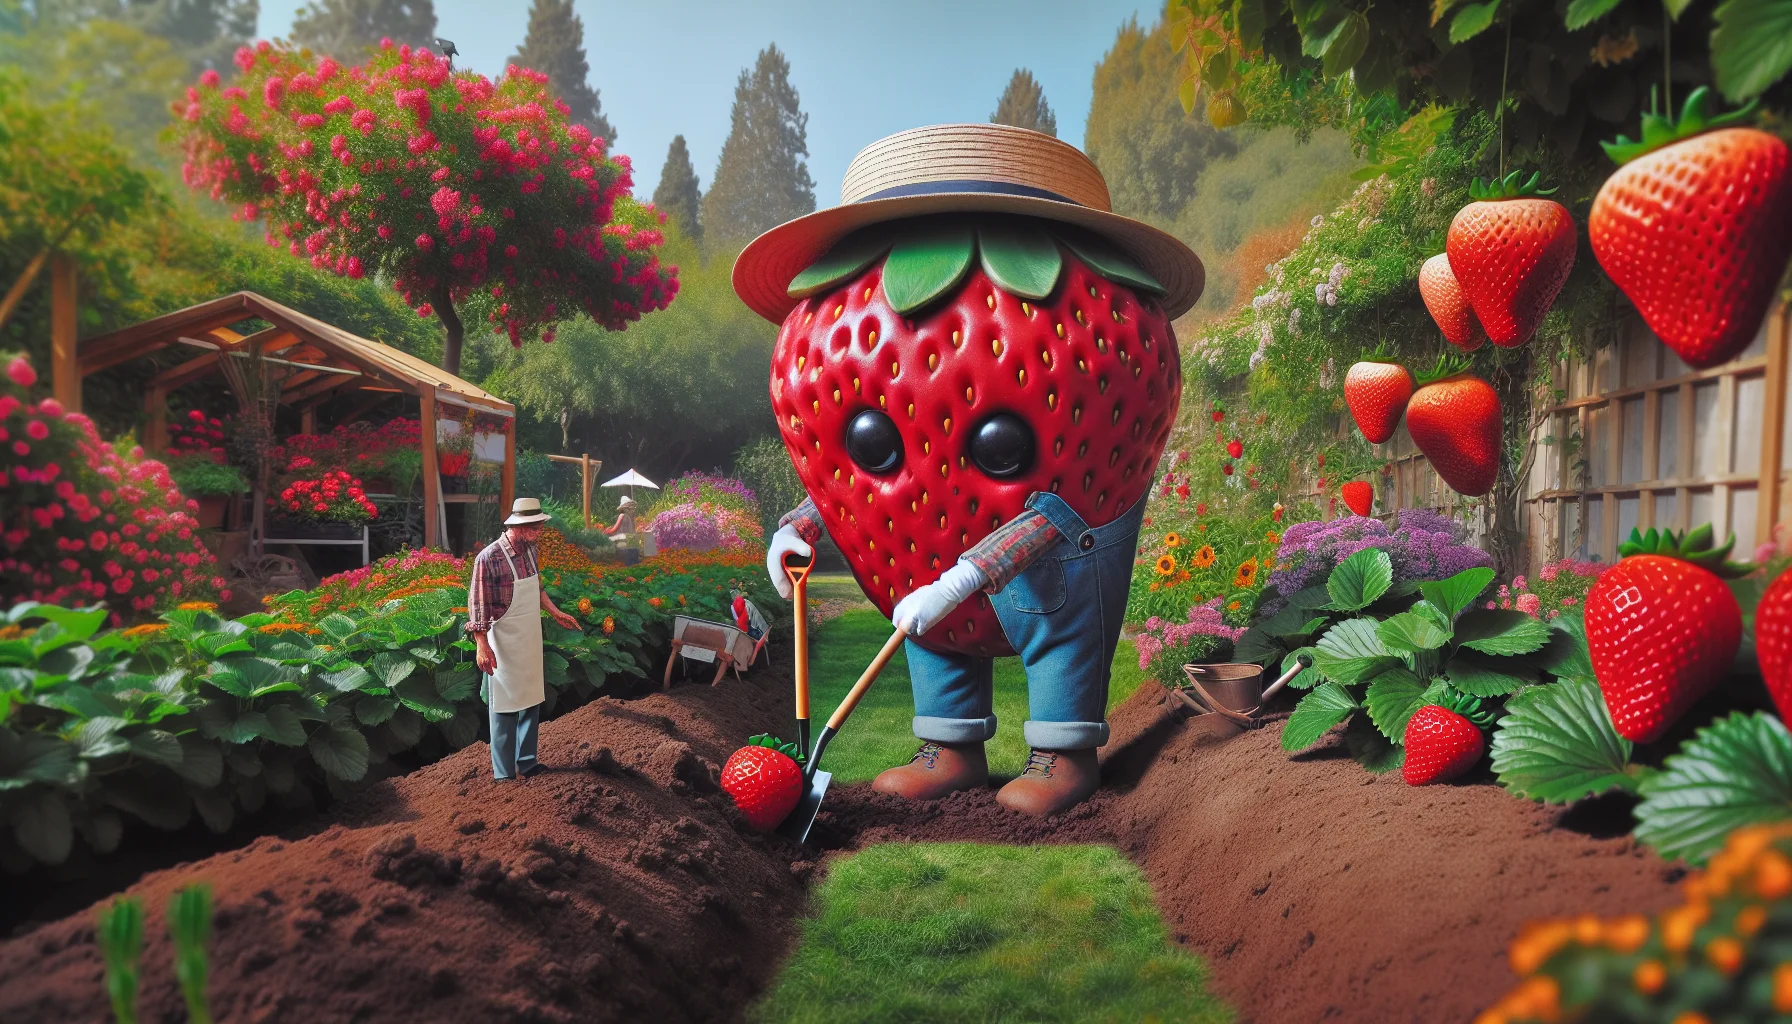 Generate a humorous, realistic image of a gardening scene. In the middle of a well-tended garden, a giant strawberry with bright red color is humorously using a small spade to plant a miniature human figure, who wears a wide-brimmed hat and overalls to appear like a classic gardener. The scene is filled with lush greenery, colorful flowers and ripe fruits hanging on trees, making the entire scenario inviting and encouraging people to find joy and laughter in gardening.